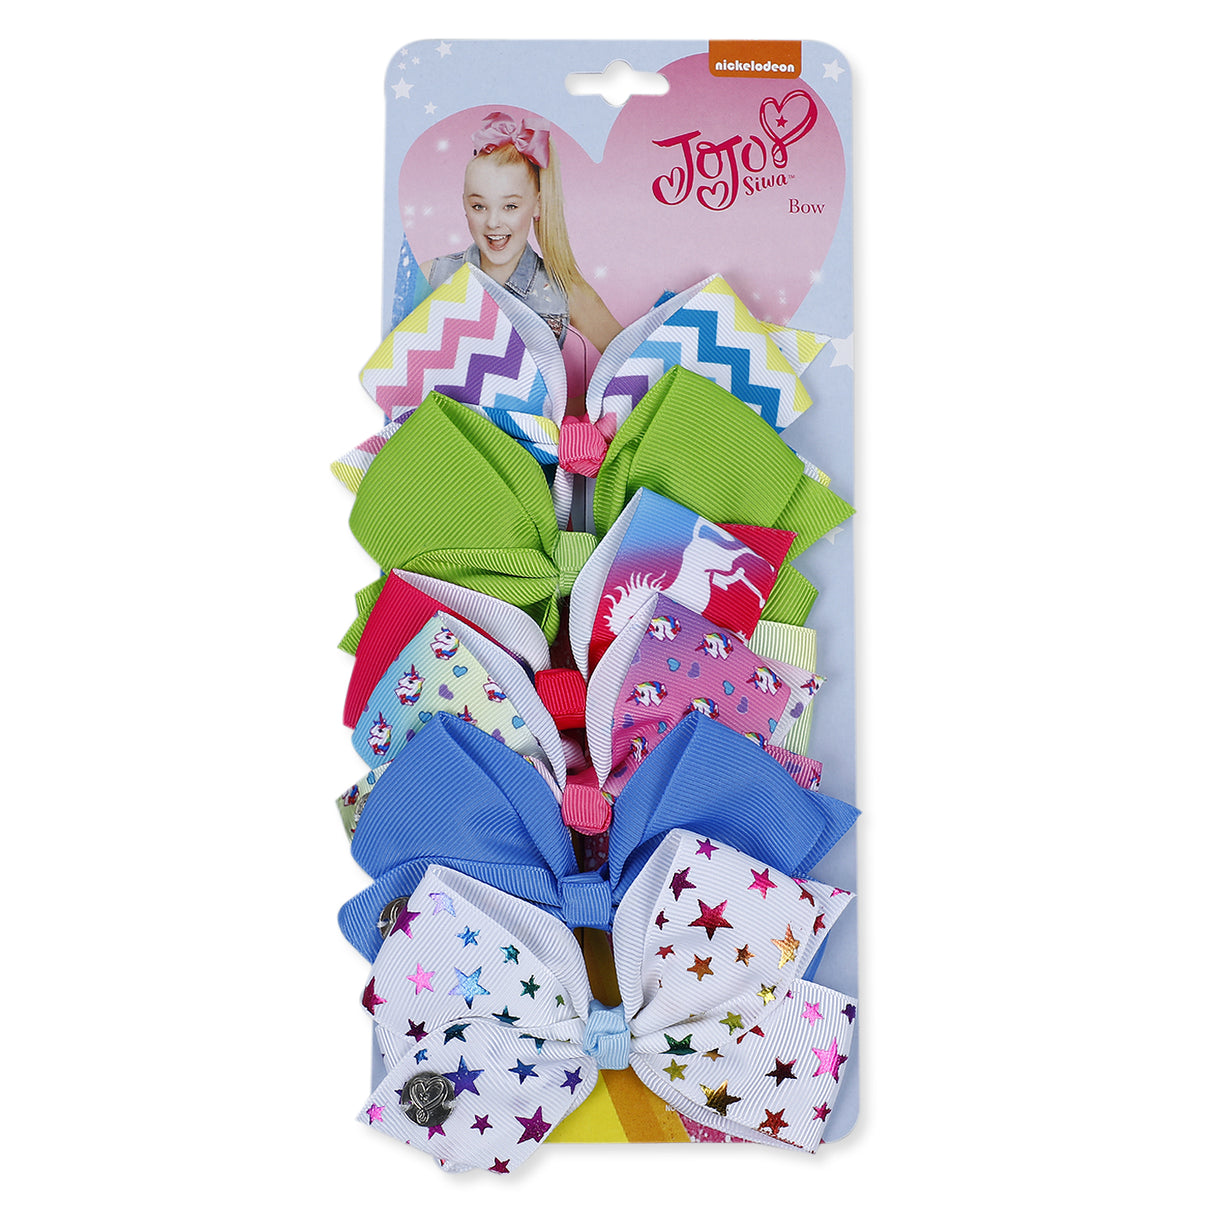 Adorable Trendy Girls Colourful 6 Pcs Hair Clips